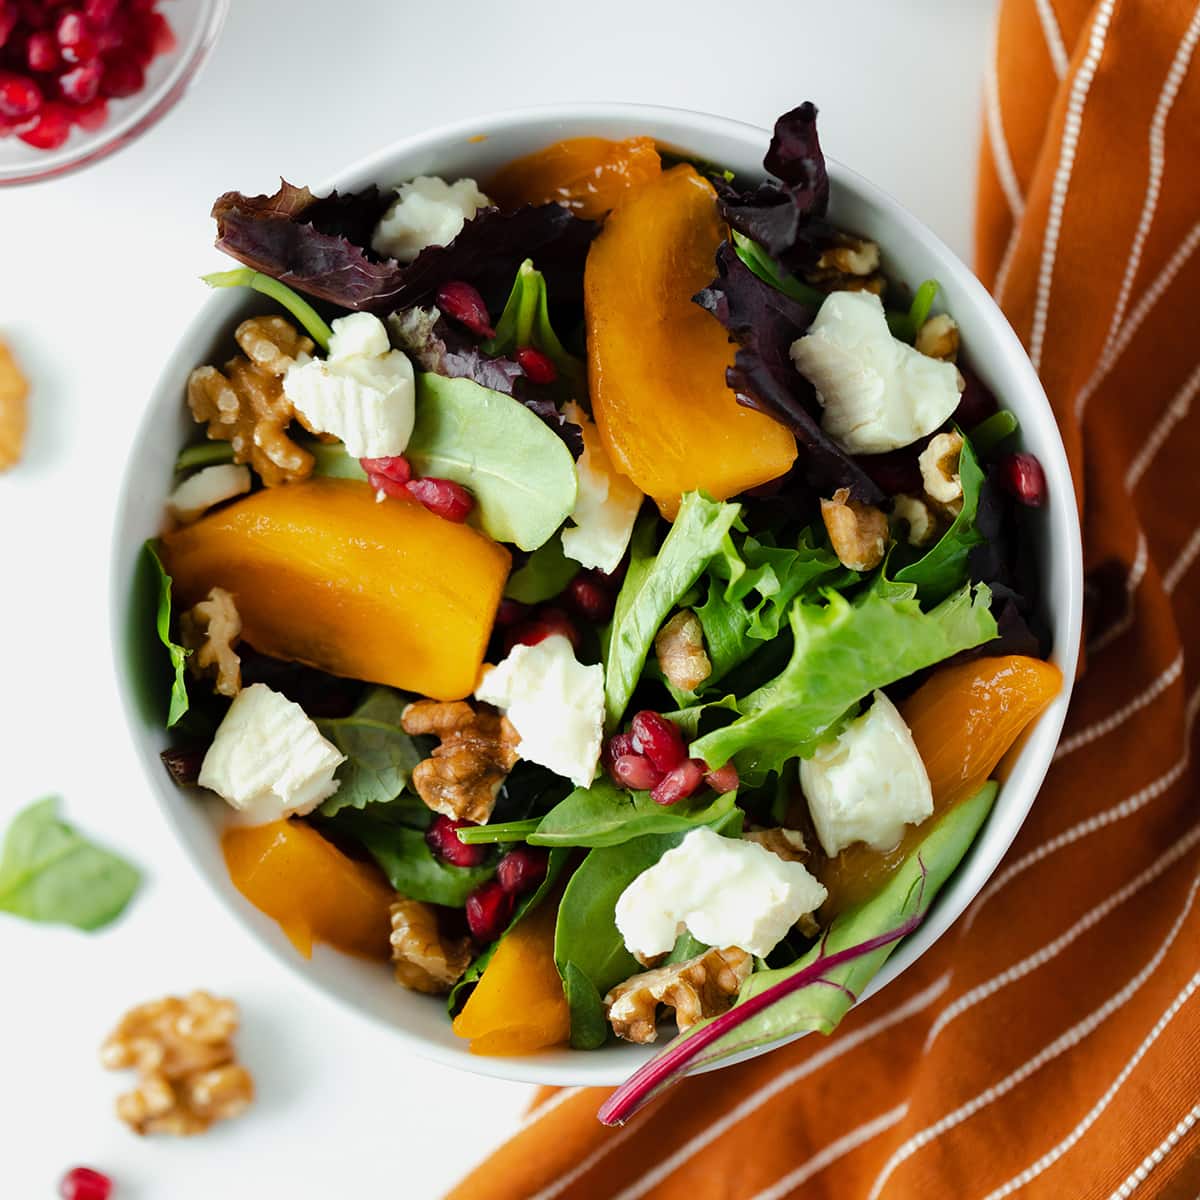 Persimmon Salad with Goat Brie and Pomegranate seeds in a white bowl on a white background with an orange napkin on the right side